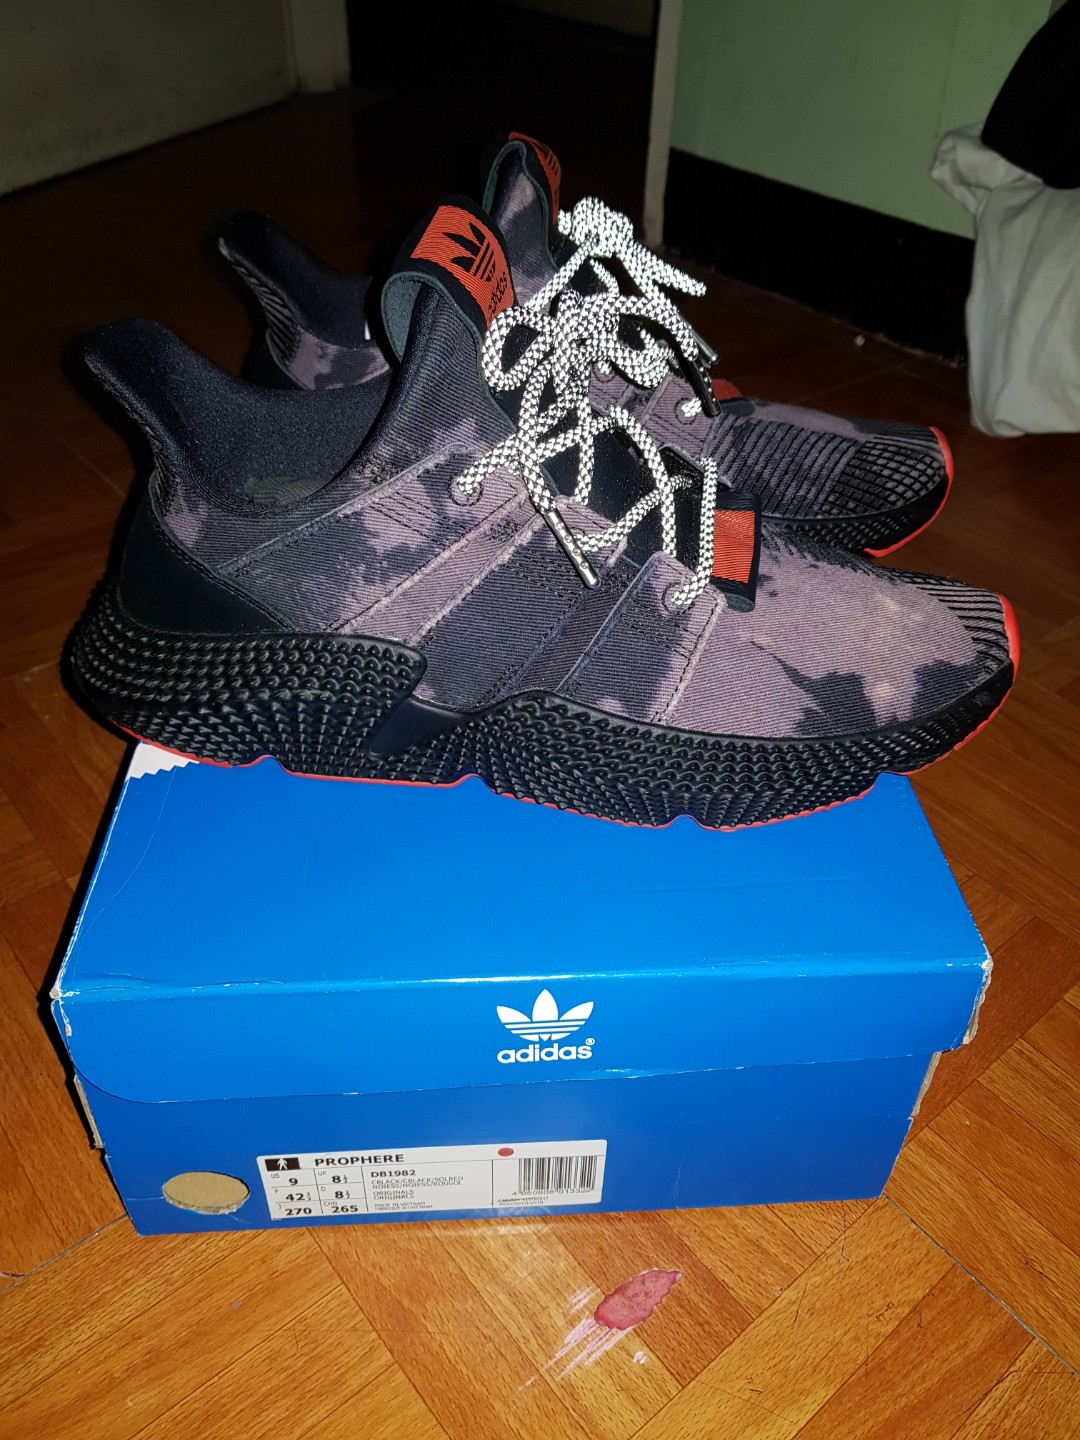 Adidas Prophere Rogue US 9 Brand new 